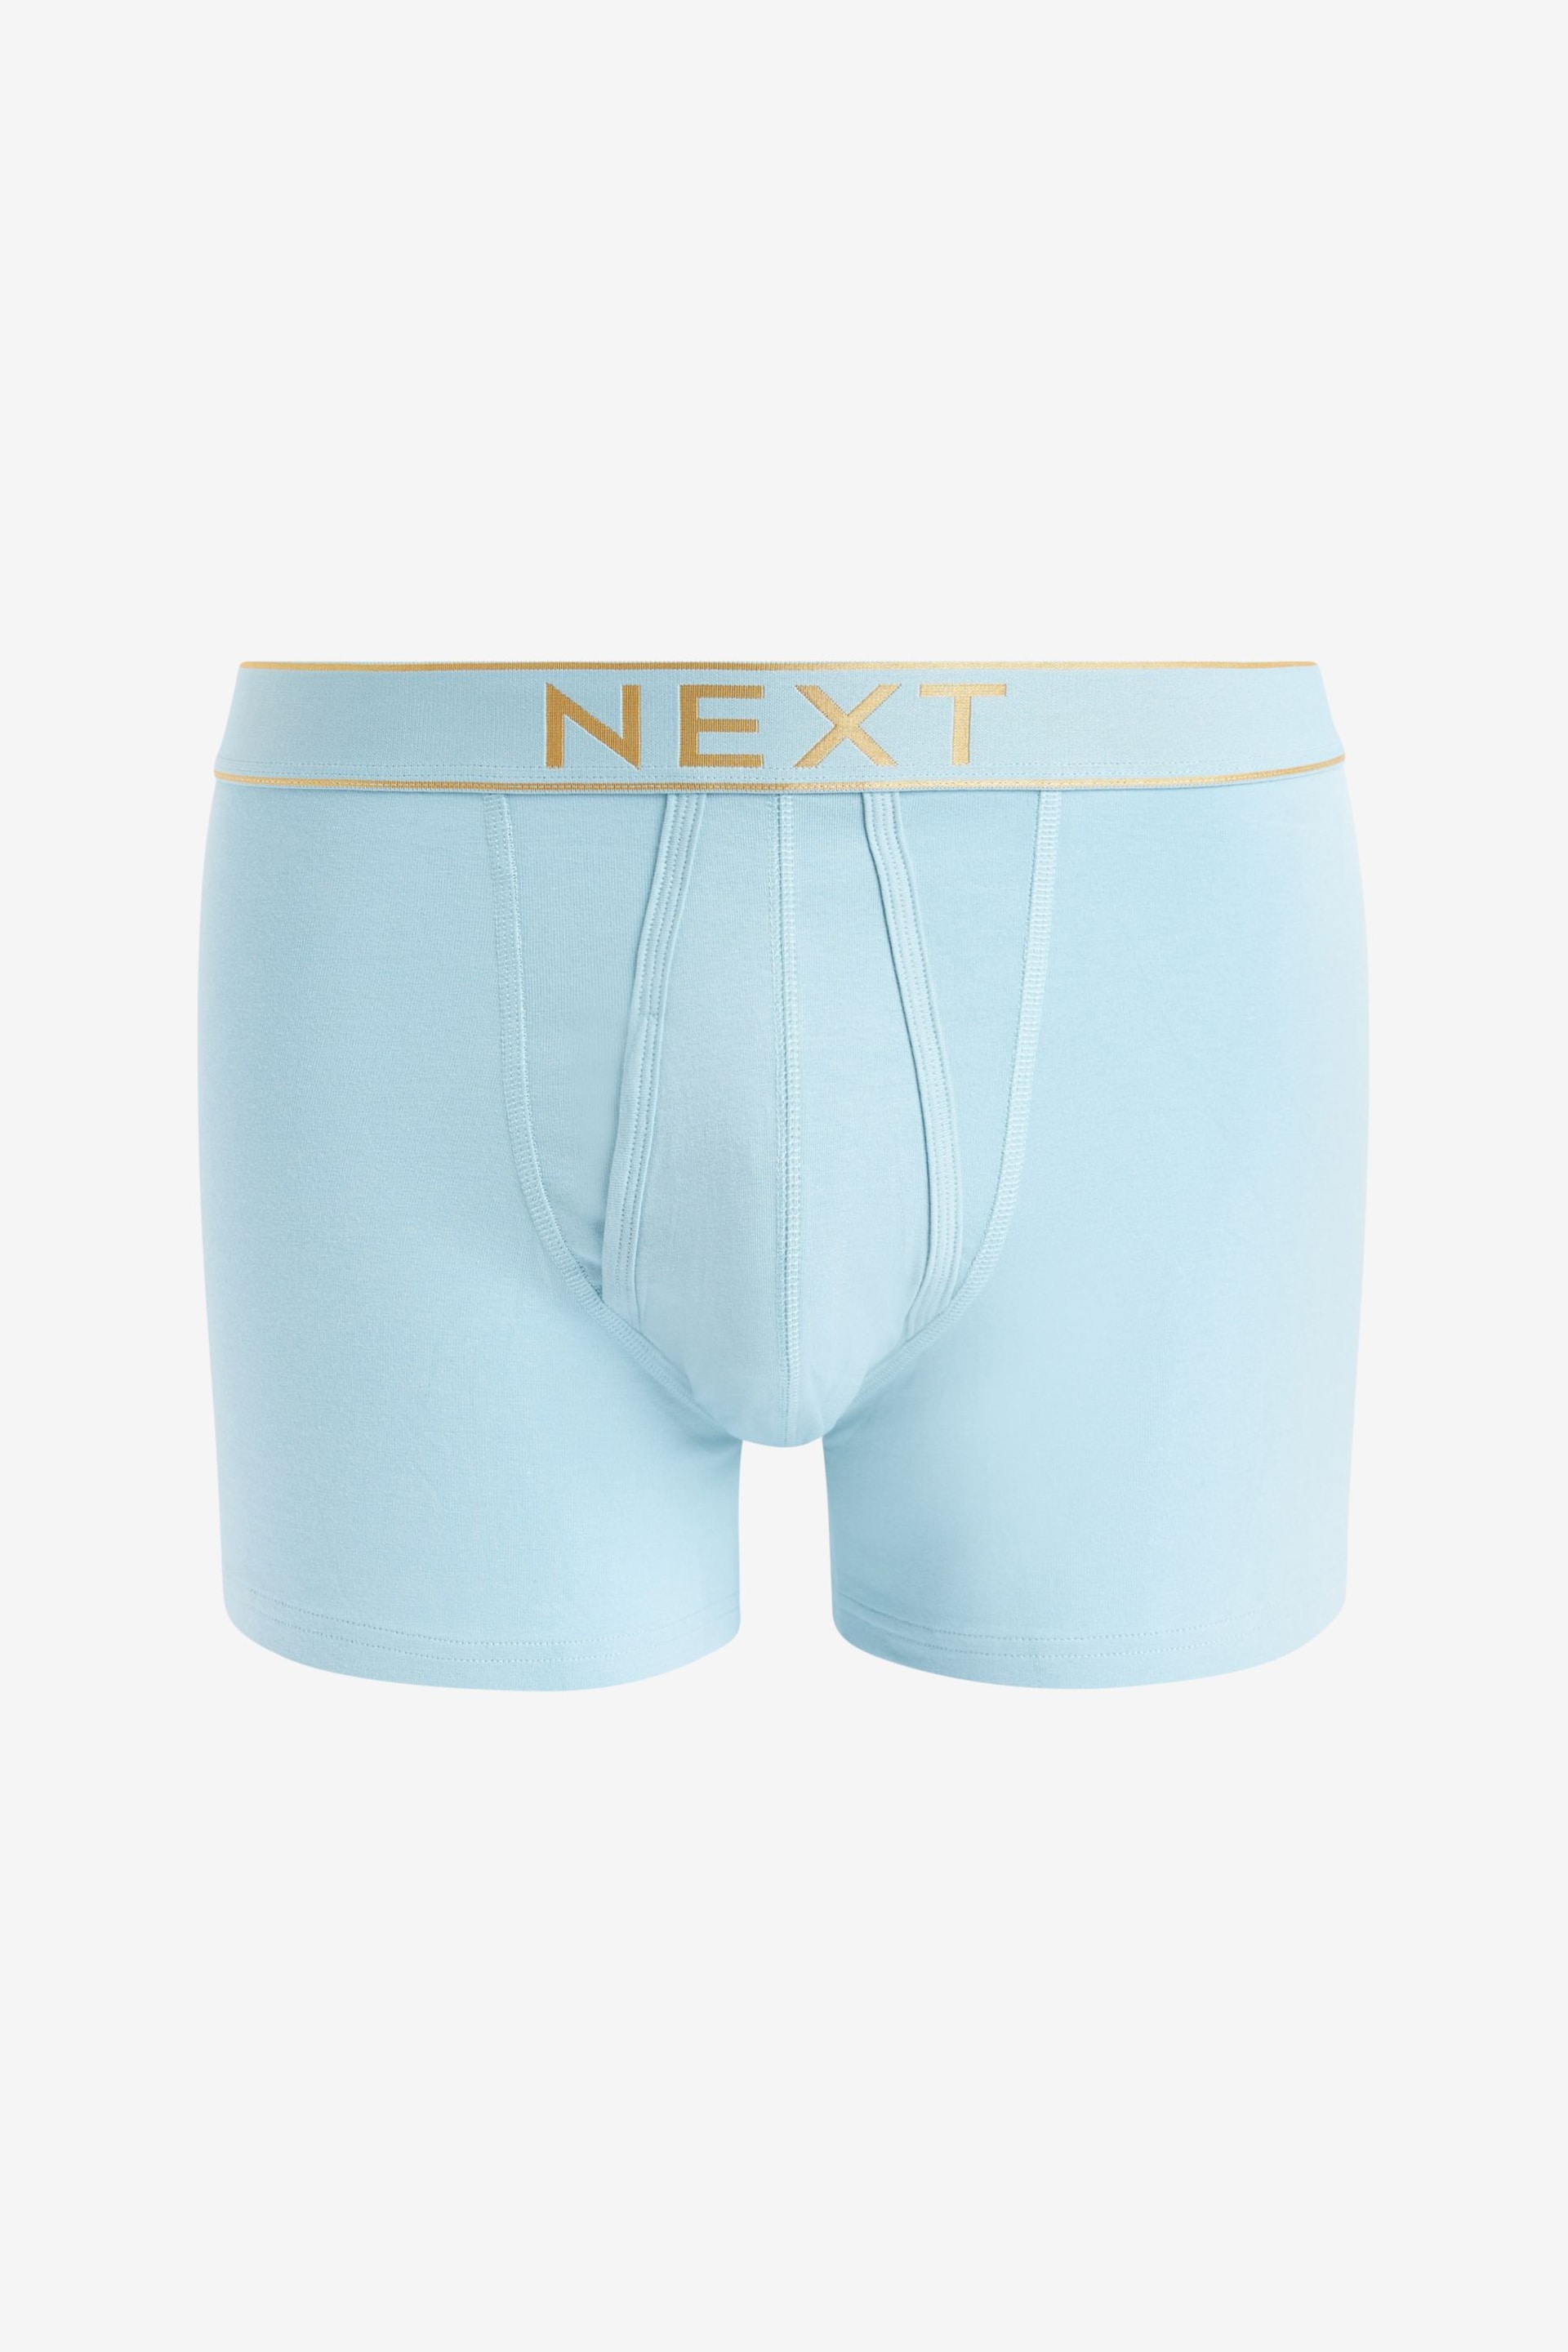 Blue Gold Waistband 10 pack A-Front Boxers - Image 10 of 13